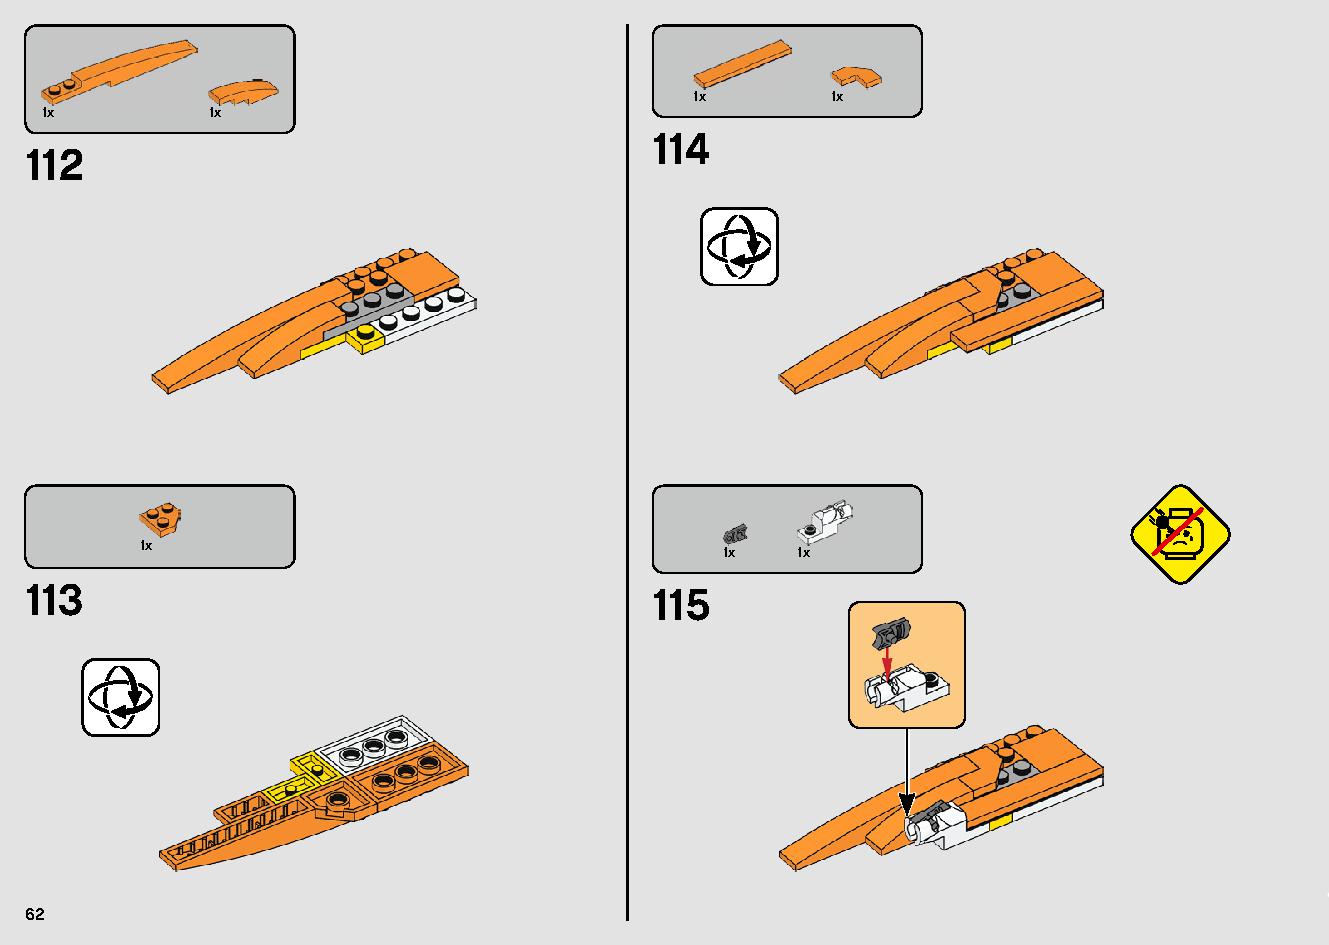 Poe Dameron's X-wing Fighter 75273 LEGO information LEGO instructions 62 page